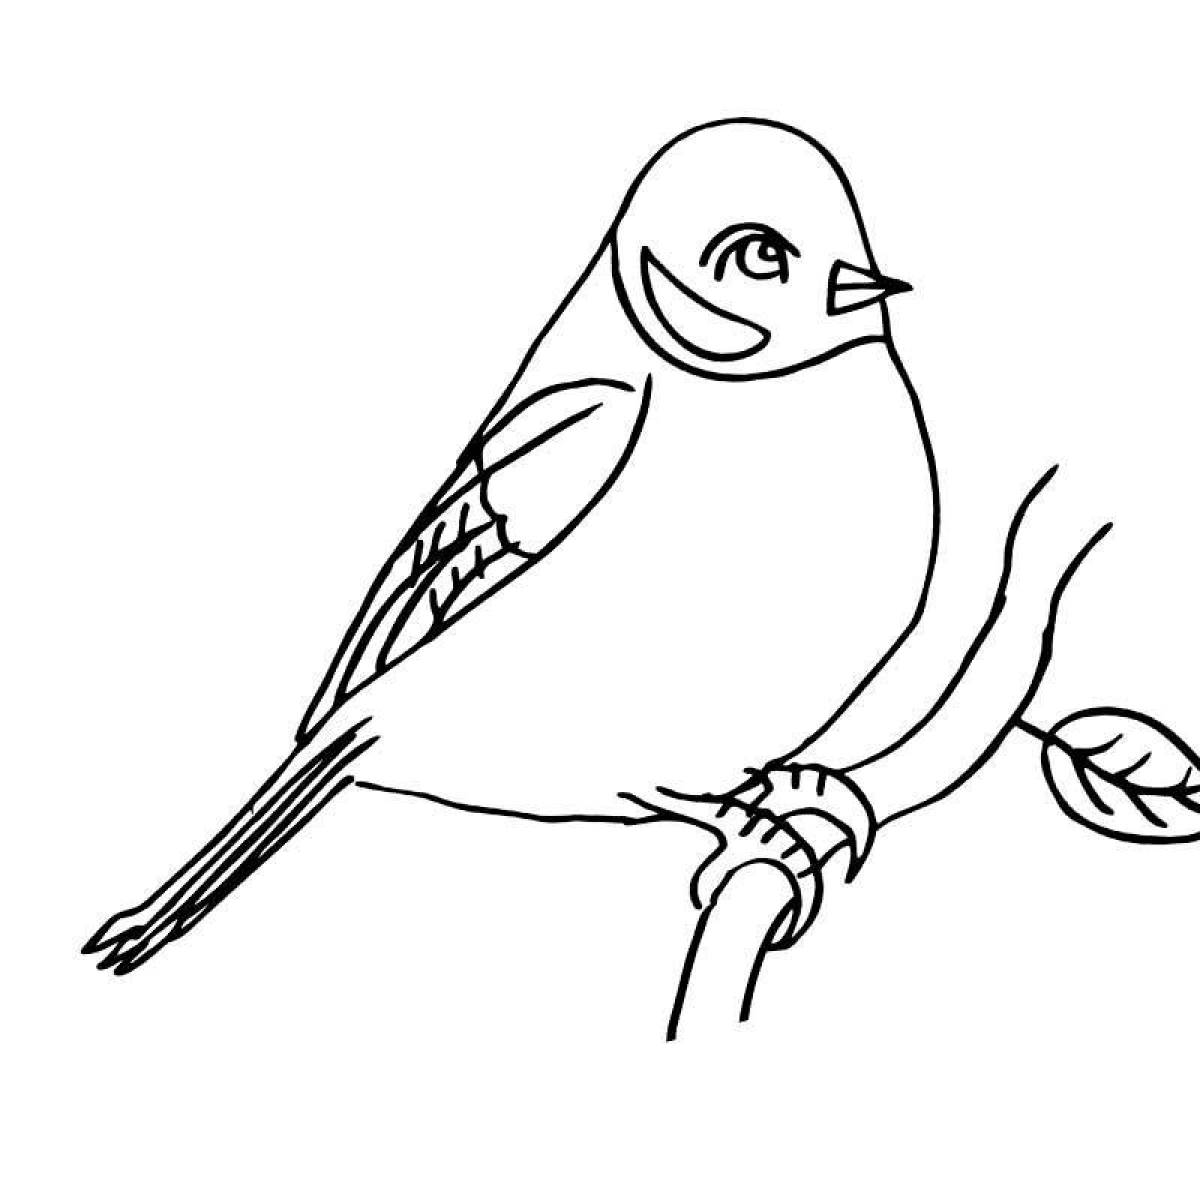 Children's cheering tit coloring page